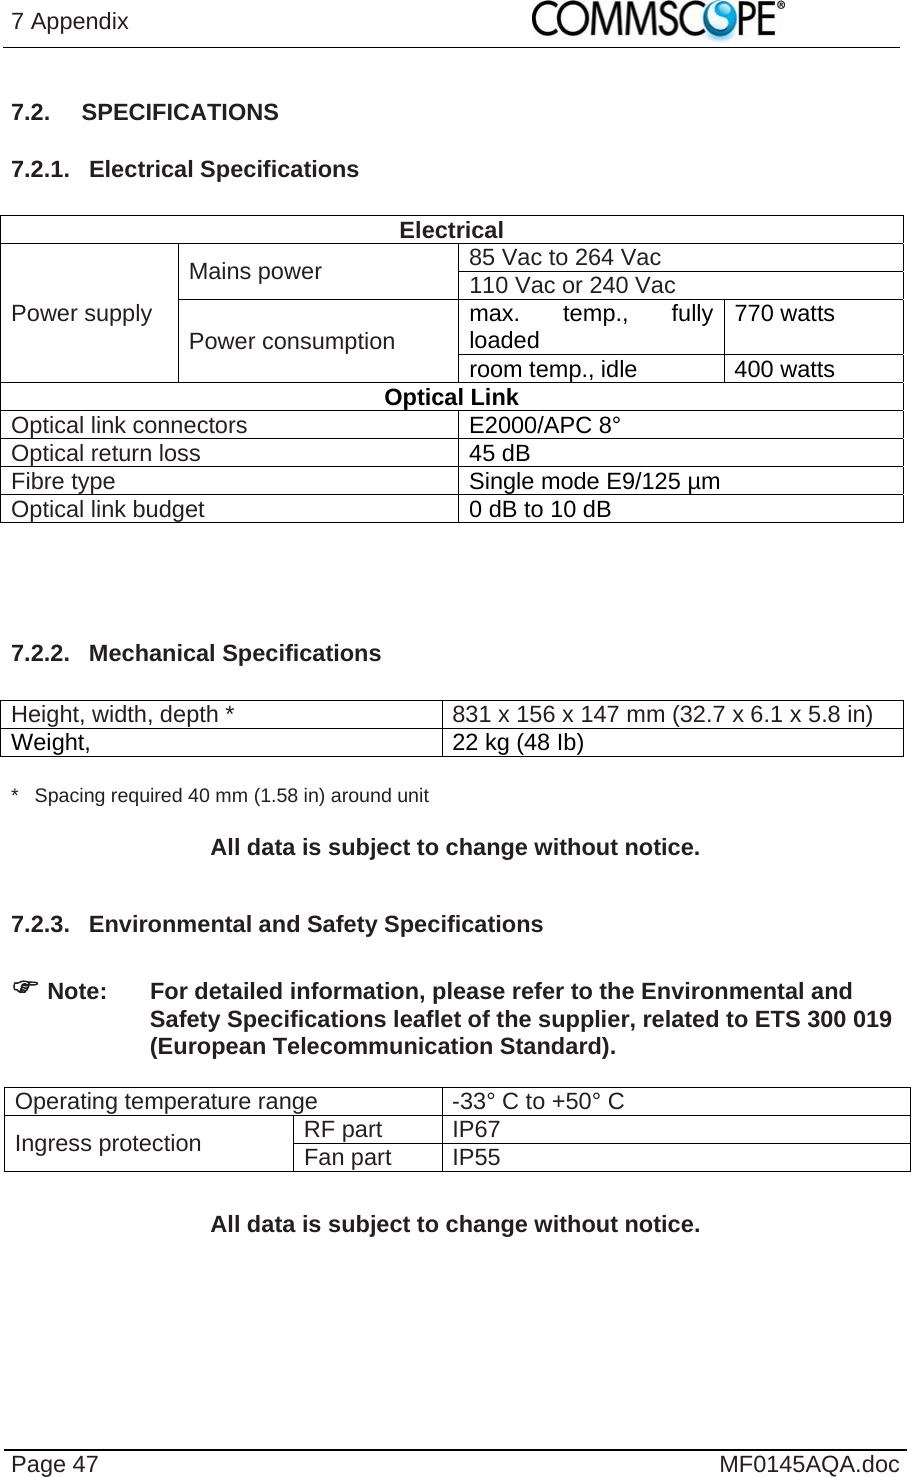 7 Appendix    Page 47  MF0145AQA.doc 7.2. SPECIFICATIONS 7.2.1. Electrical Specifications  Electrical Power supply Mains power  85 Vac to 264 Vac 110 Vac or 240 Vac Power consumption  max. temp., fully loaded  770 watts room temp., idle  400 watts Optical Link Optical link connectors  E2000/APC 8° Optical return loss  45 dB Fibre type  Single mode E9/125 µm Optical link budget  0 dB to 10 dB    7.2.2. Mechanical Specifications  Height, width, depth *  831 x 156 x 147 mm (32.7 x 6.1 x 5.8 in) Weight,   22 kg (48 Ib)  *   Spacing required 40 mm (1.58 in) around unit  All data is subject to change without notice.  7.2.3.  Environmental and Safety Specifications    Note:  For detailed information, please refer to the Environmental and Safety Specifications leaflet of the supplier, related to ETS 300 019 (European Telecommunication Standard).  Operating temperature range  -33° C to +50° C  Ingress protection  RF part  IP67 Fan part IP55 All data is subject to change without notice.  